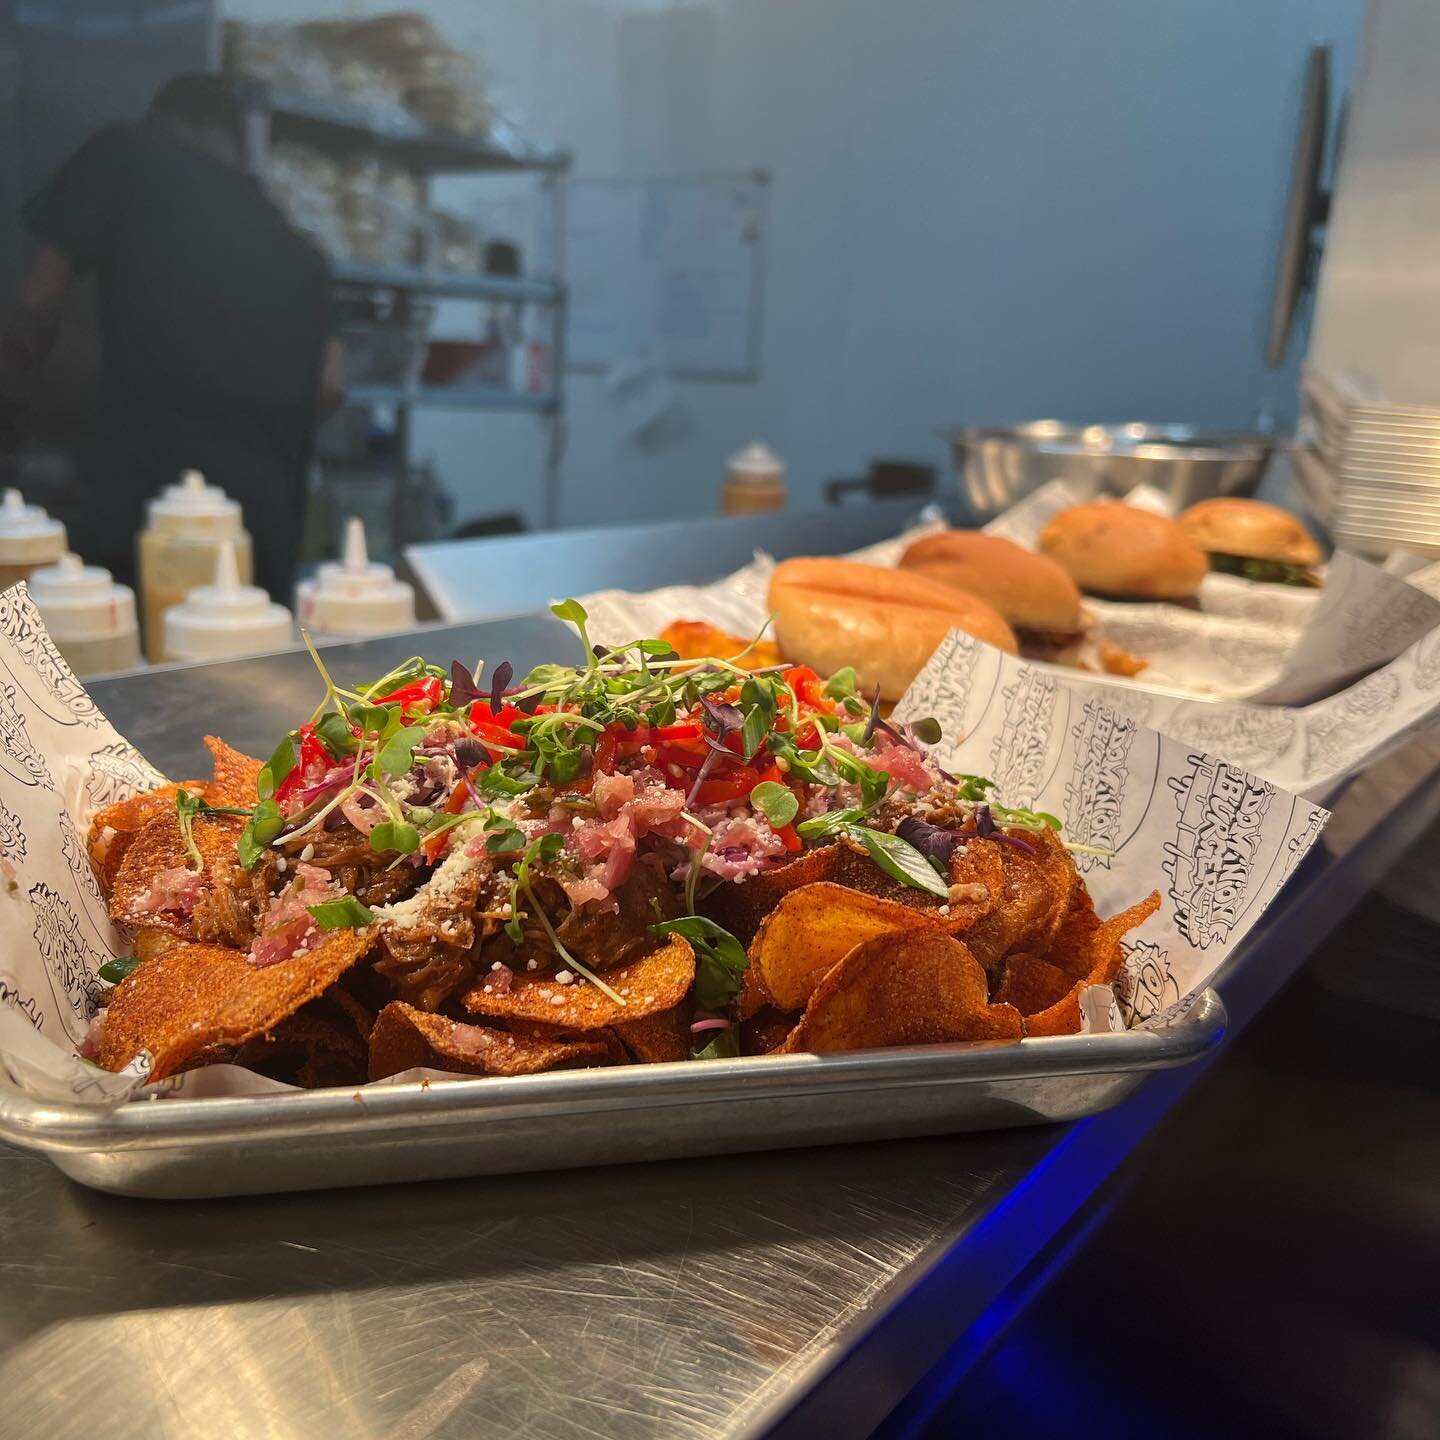 It&rsquo;s not too late to come on down and say hi! Kitchen is open tonight until 9:30 p.m. with a righteous special of loaded BBQ nachos! We load these house made BBQ chips with pulled pork, cotija cheese, house made relish, and pickled Fresno chili